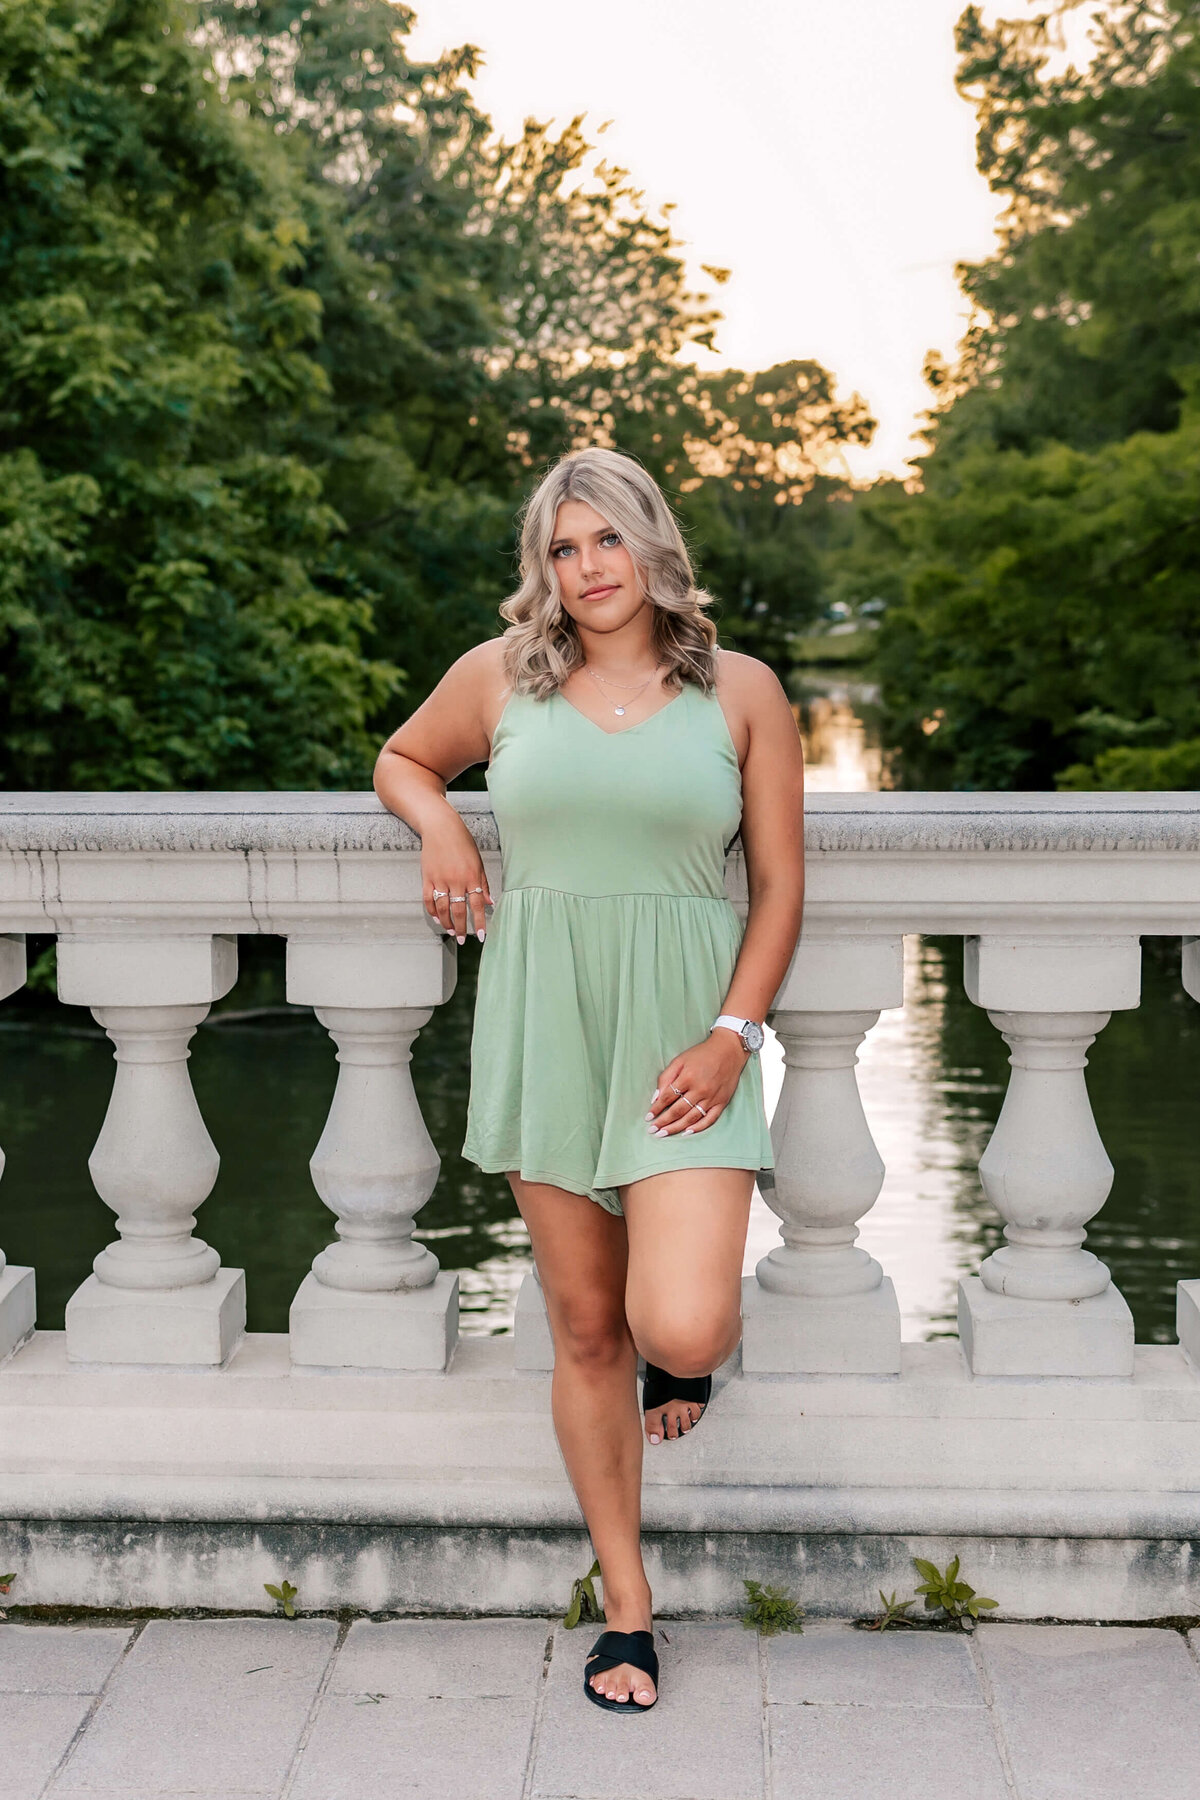 A blonde haired high school senior girl leaned against a concrete railing with trees and a pond in the background at sunset